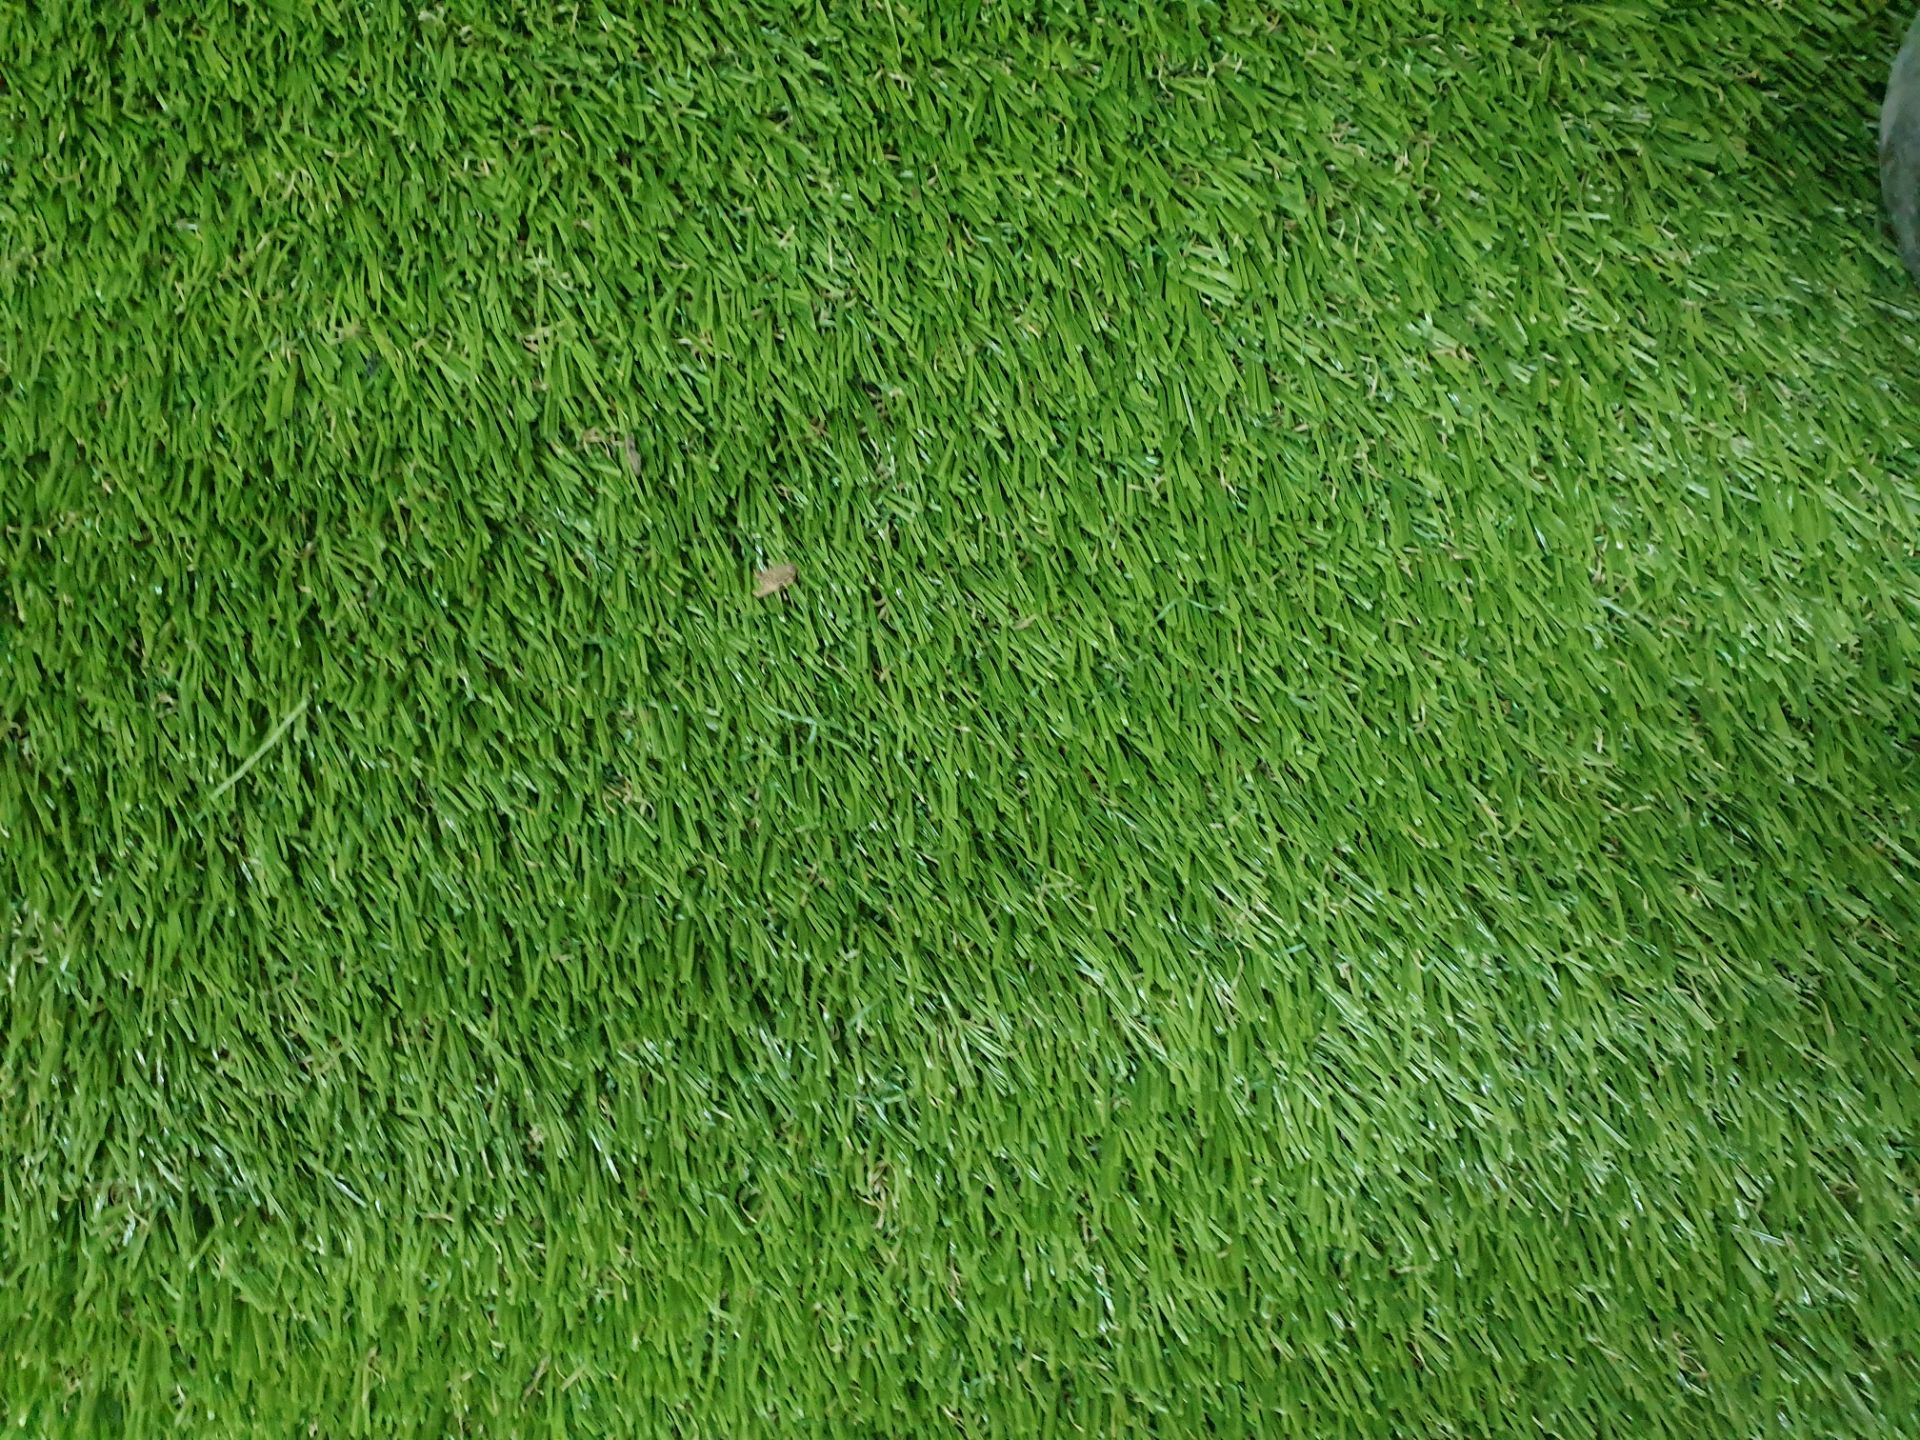 Roll of Green Artificial Grass | Approximate size: 2m x 2.3m - Image 3 of 3